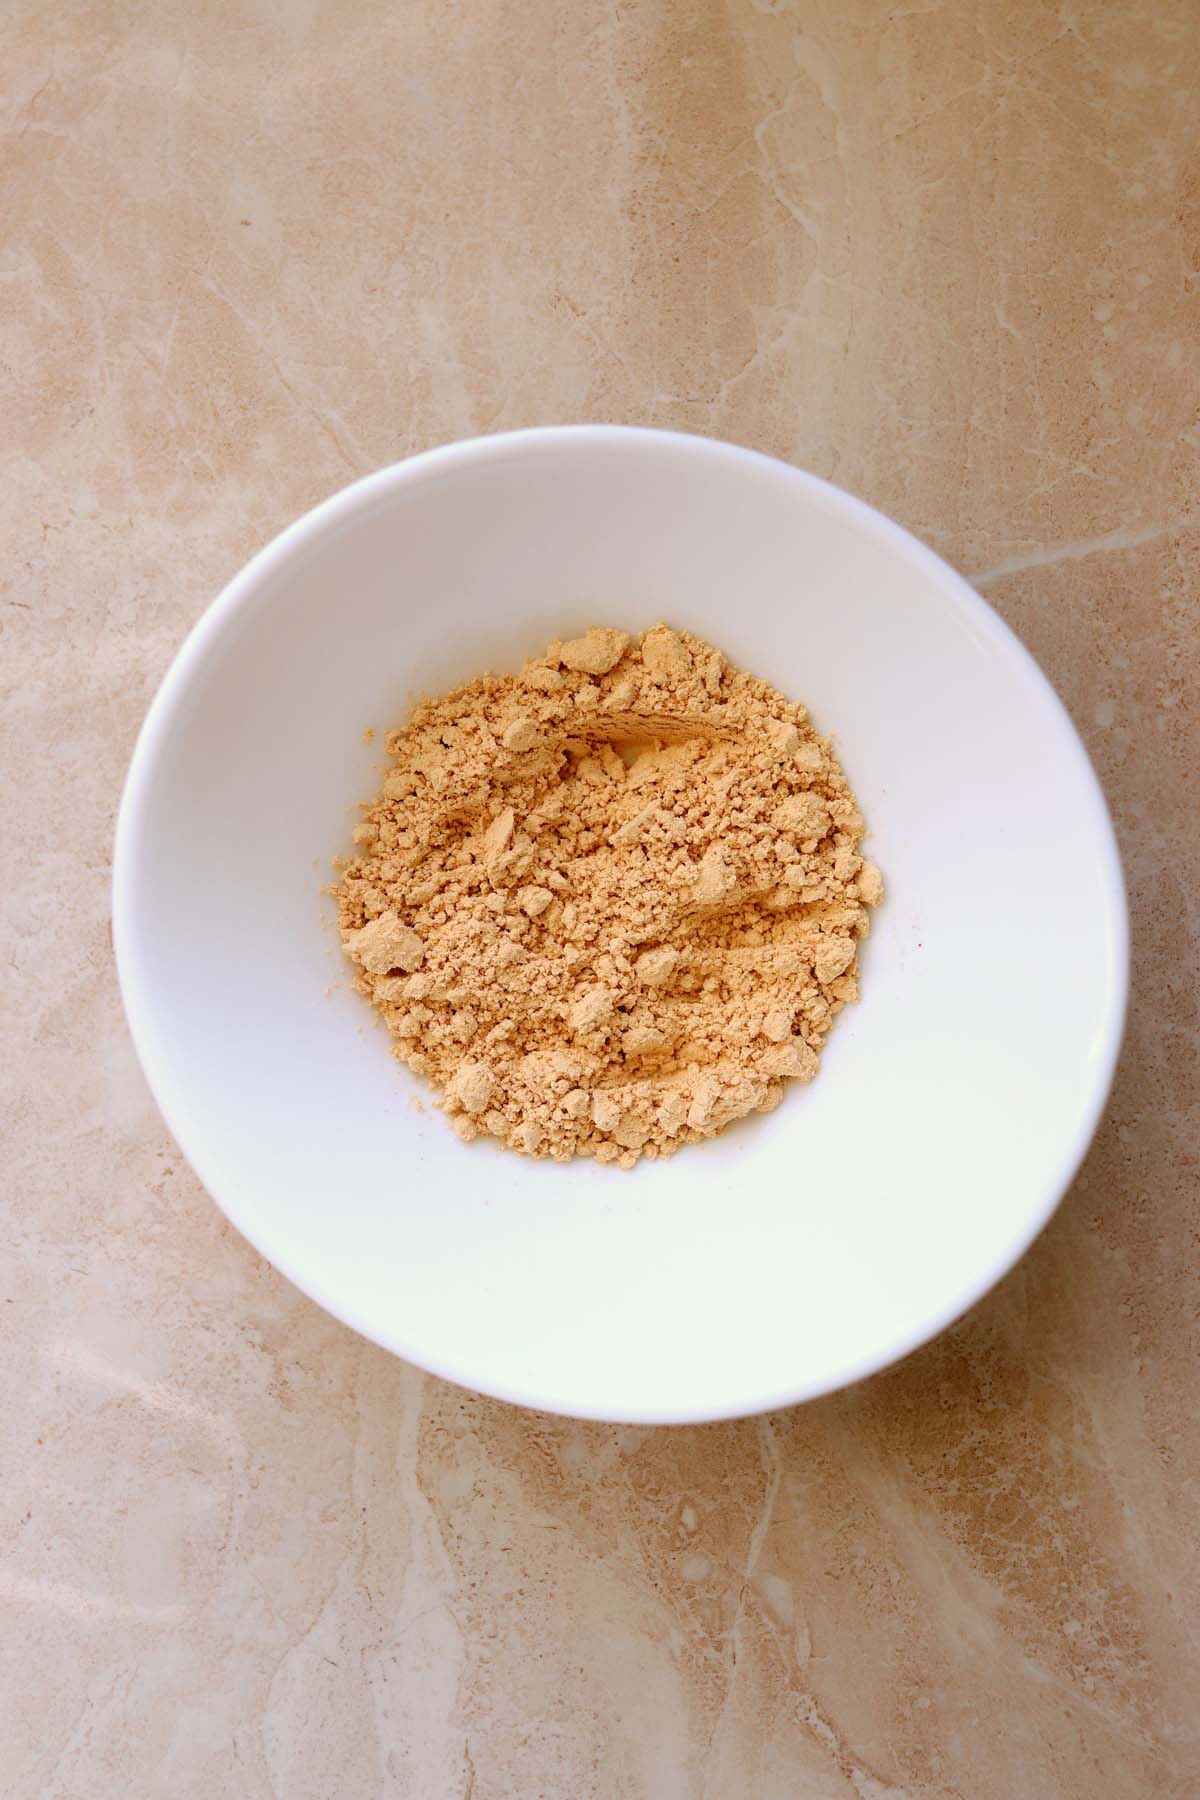 Peanut butter powder and water in a bowl.